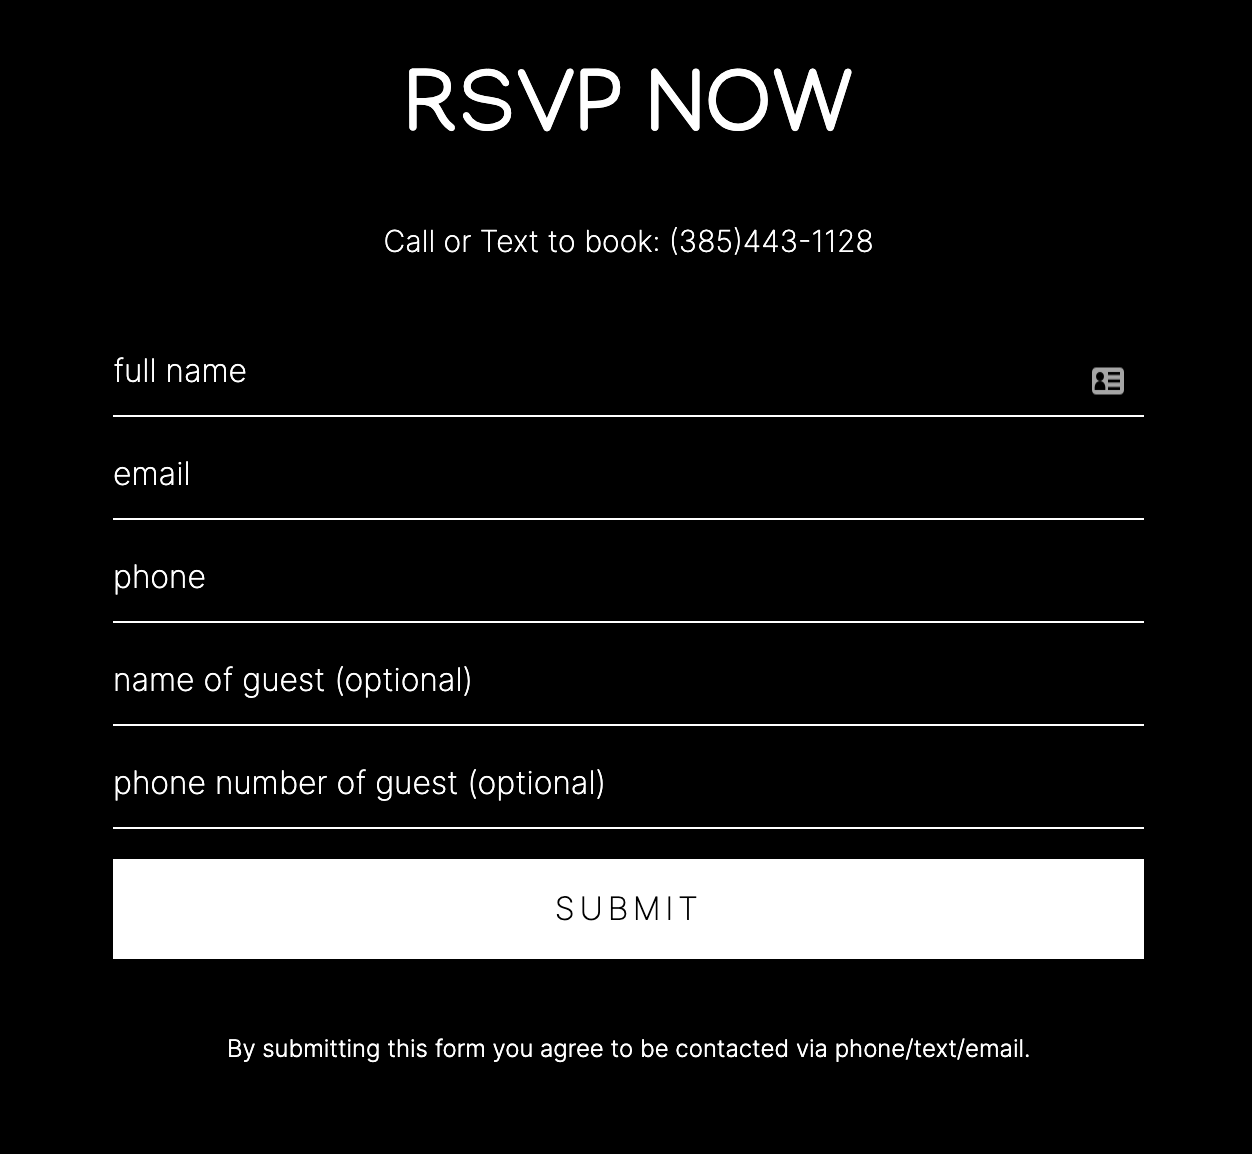 Example of a RSVP form